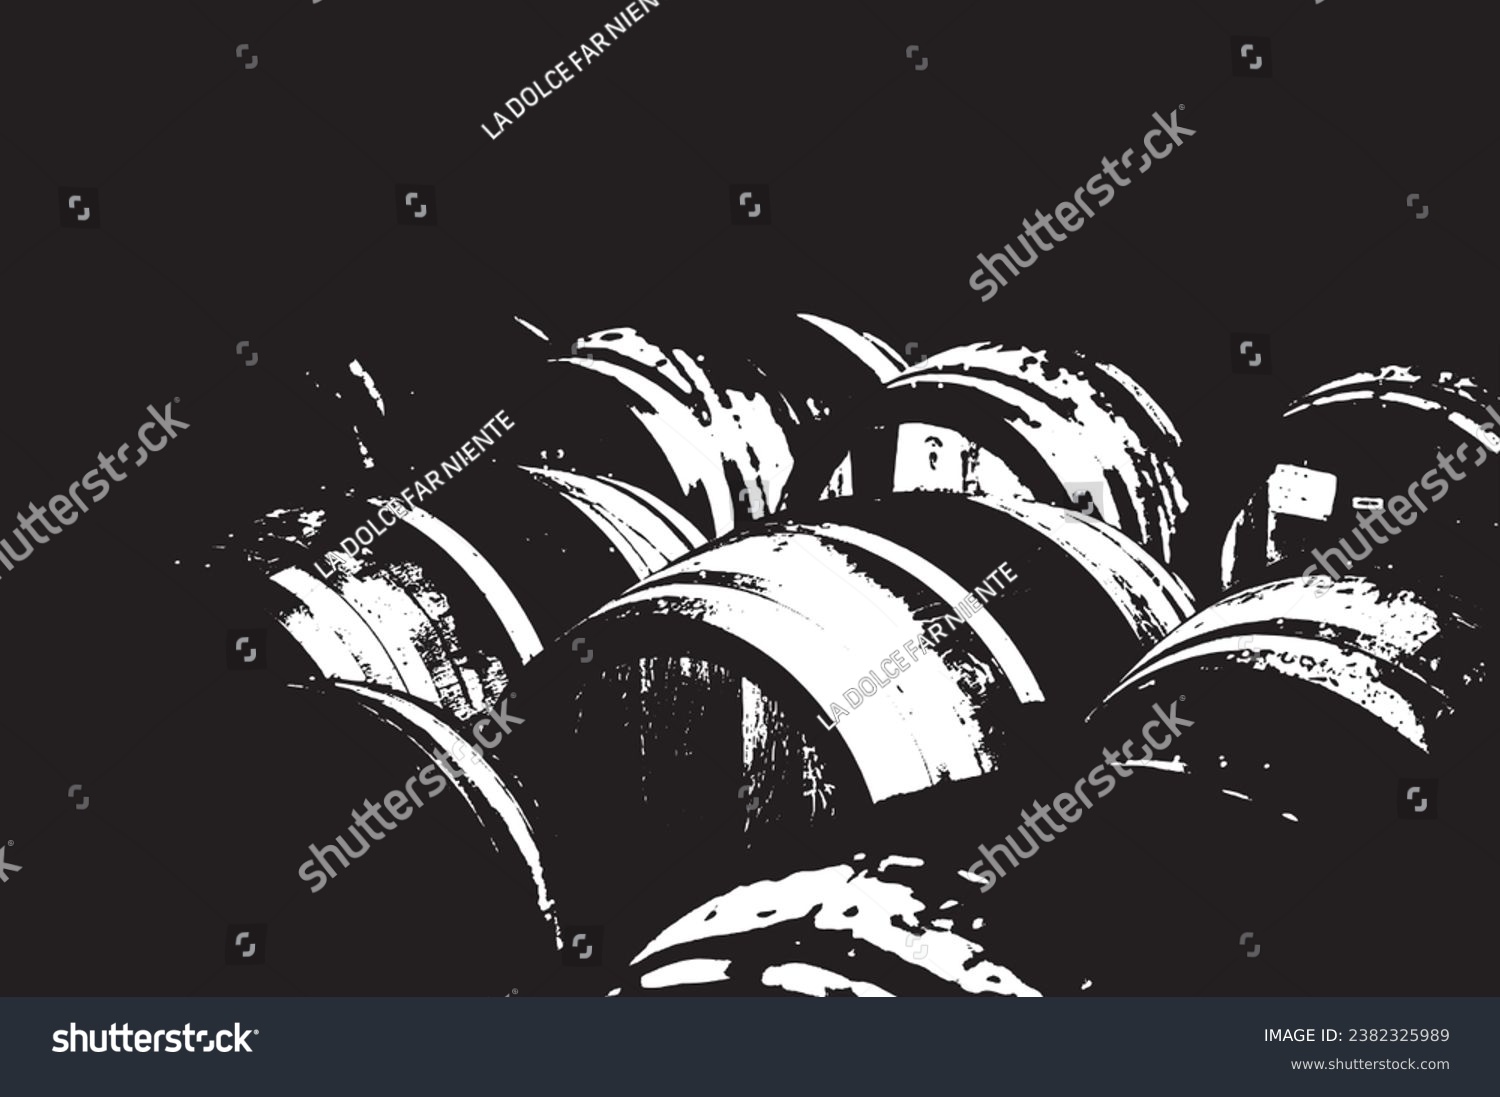 Wine related items - barrels, bottles, storage, exclusive design, vector, oak barrel, cabernet, sauvignon blanc, natural wood, organic wines, cask, winery, caves and cellars, cellars of the winery #2382325989